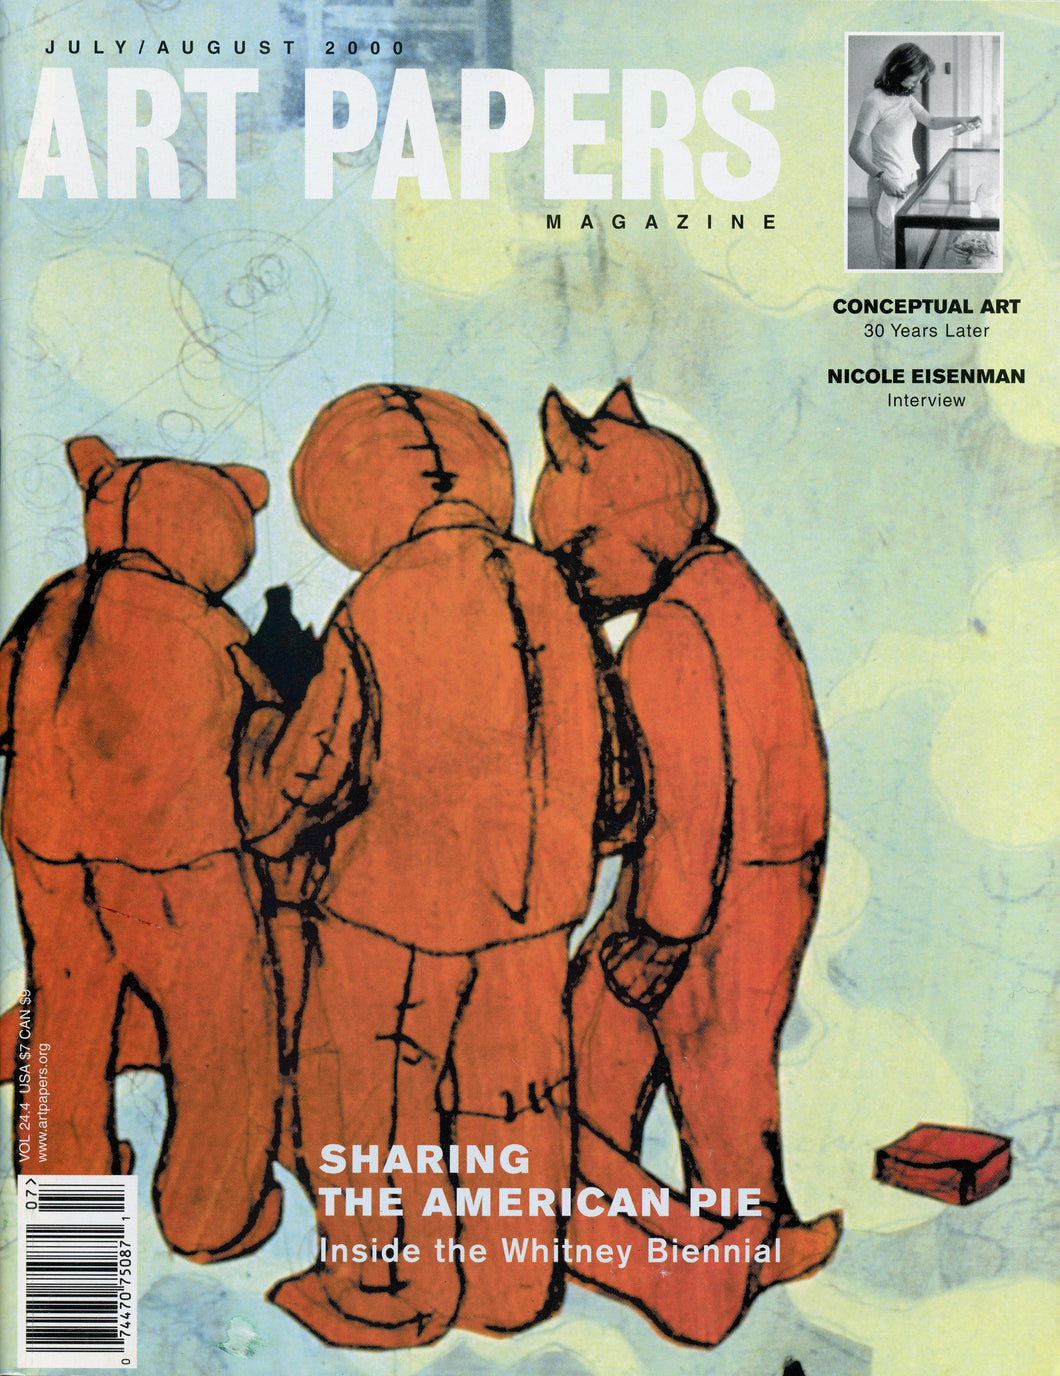 ART PAPERS 24.04 - July/Aug 2000